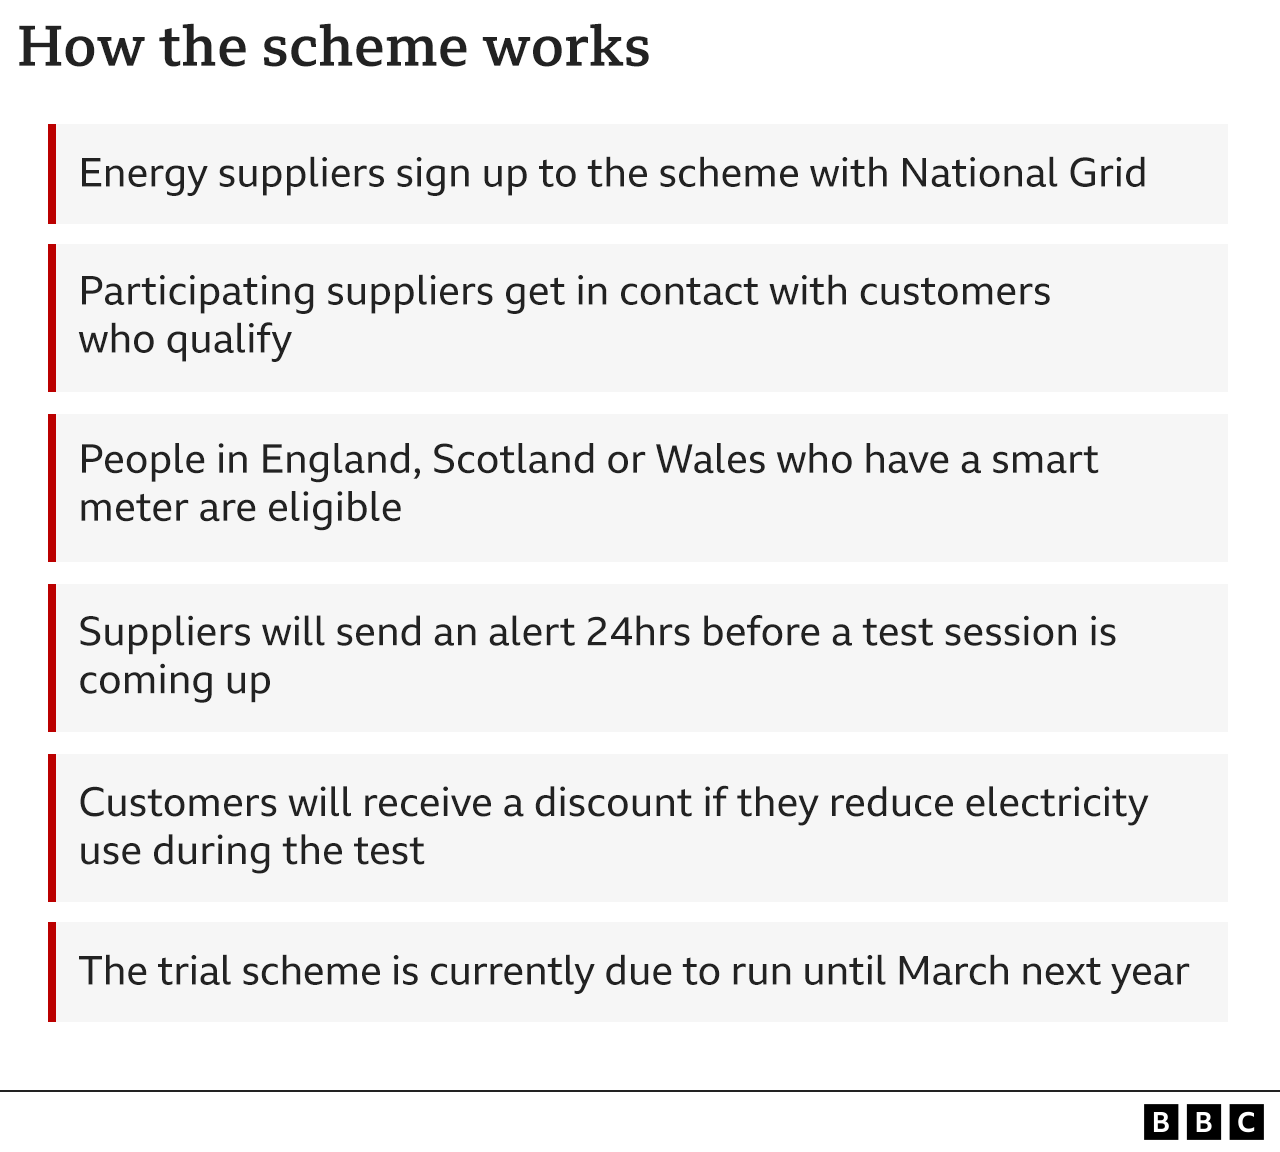 Graphic on how the scheme works: Energy suppliers sign up to the scheme with National Grid; Participating suppliers get in contact with customers who qualify; People in England, Scotland or Wales who have a smart meter are eligible; Suppliers will send an alert 24hrs before a test session is coming up; Customers will receive a discount if they reduce electricity use during the test; The trial scheme is currently due to run until March next year